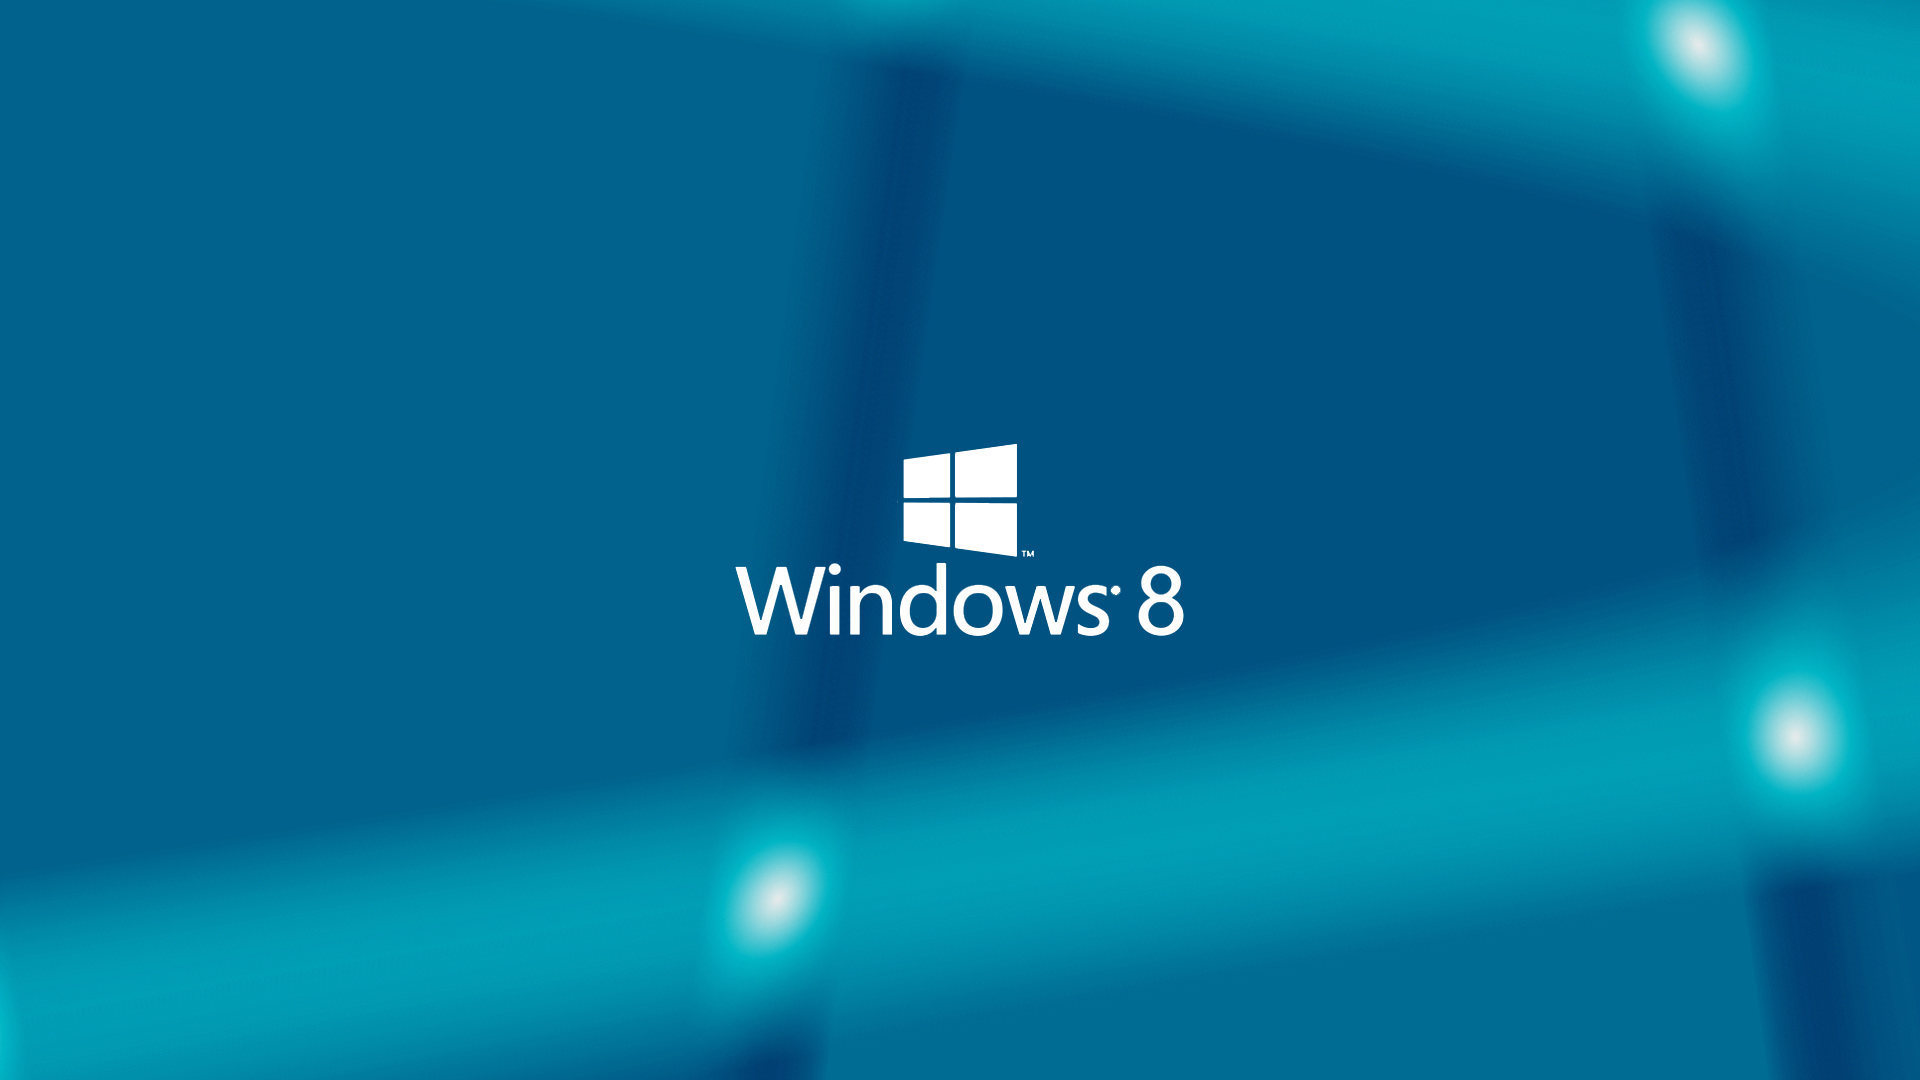 25 Latest Collection of Windows 8 Wallpapers   FunPulp 1920x1080